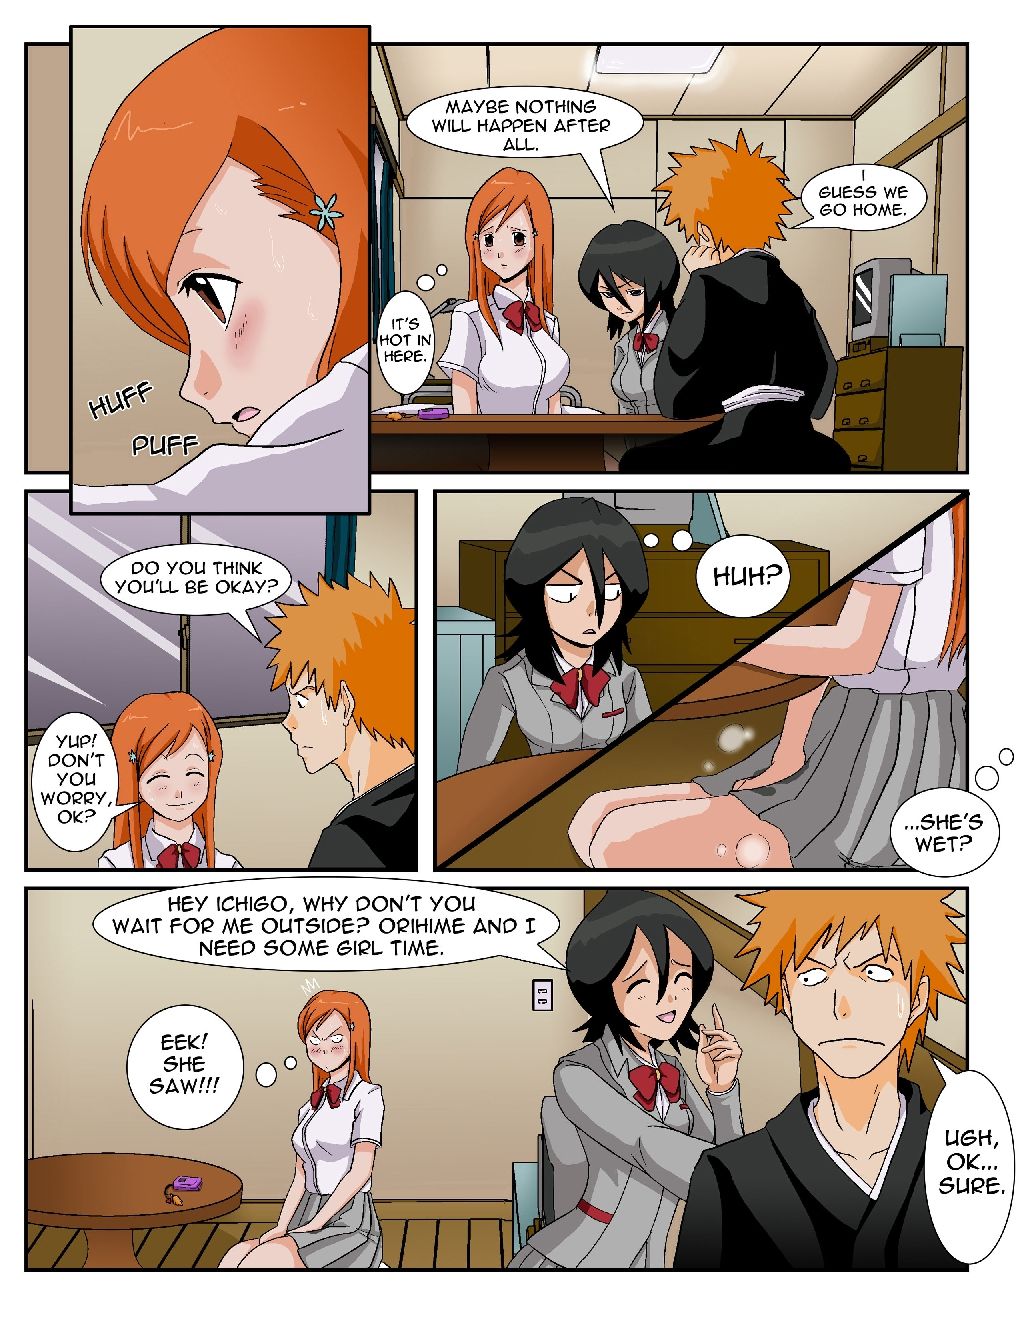 Bleach: orihime's new perspective - Page 6 - HentaiEra